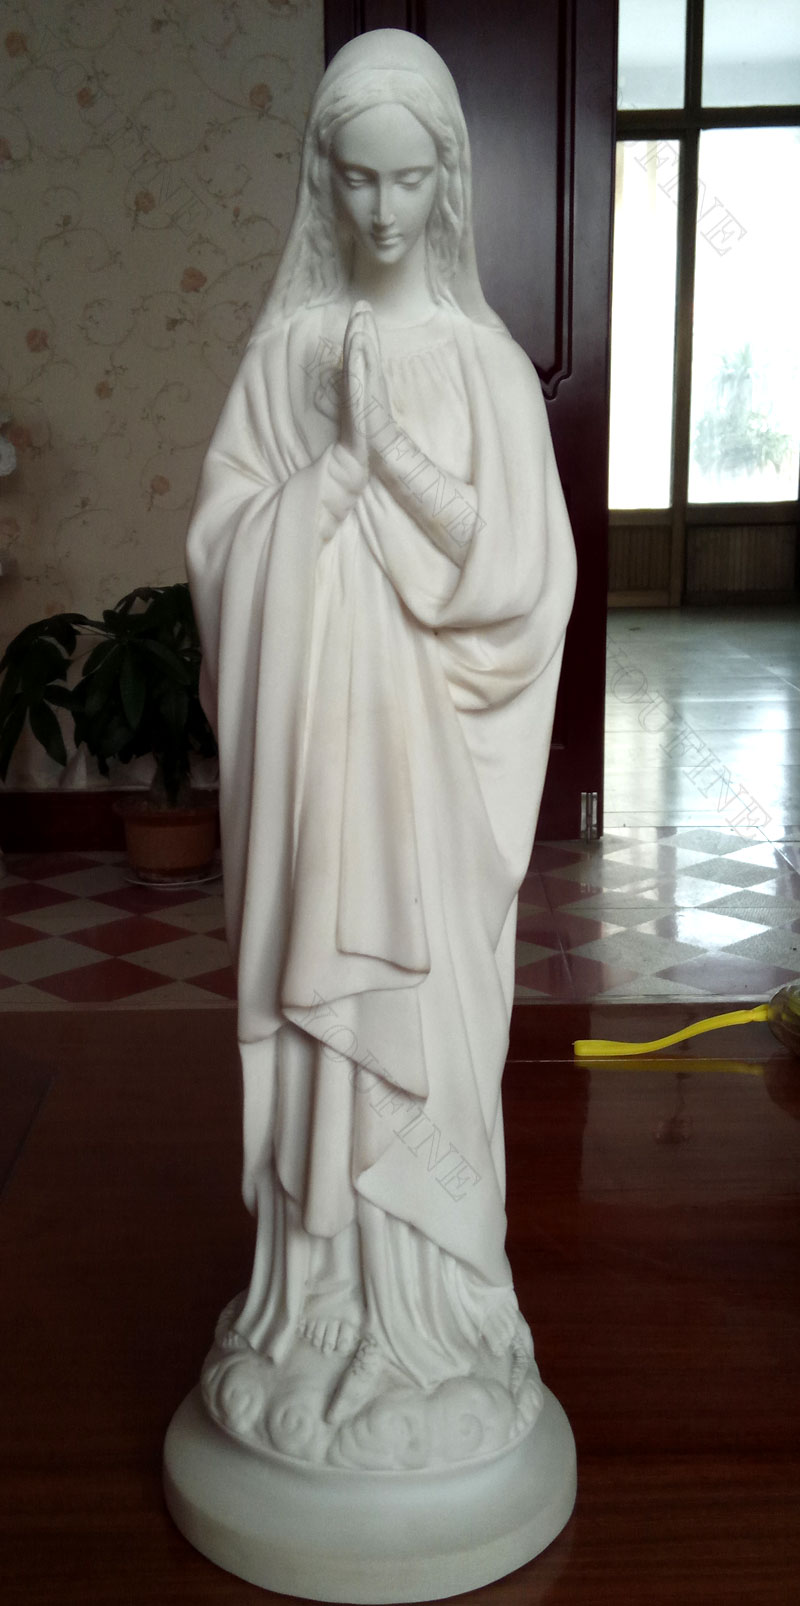 Life size white marble mother mary statues for interior decor designs